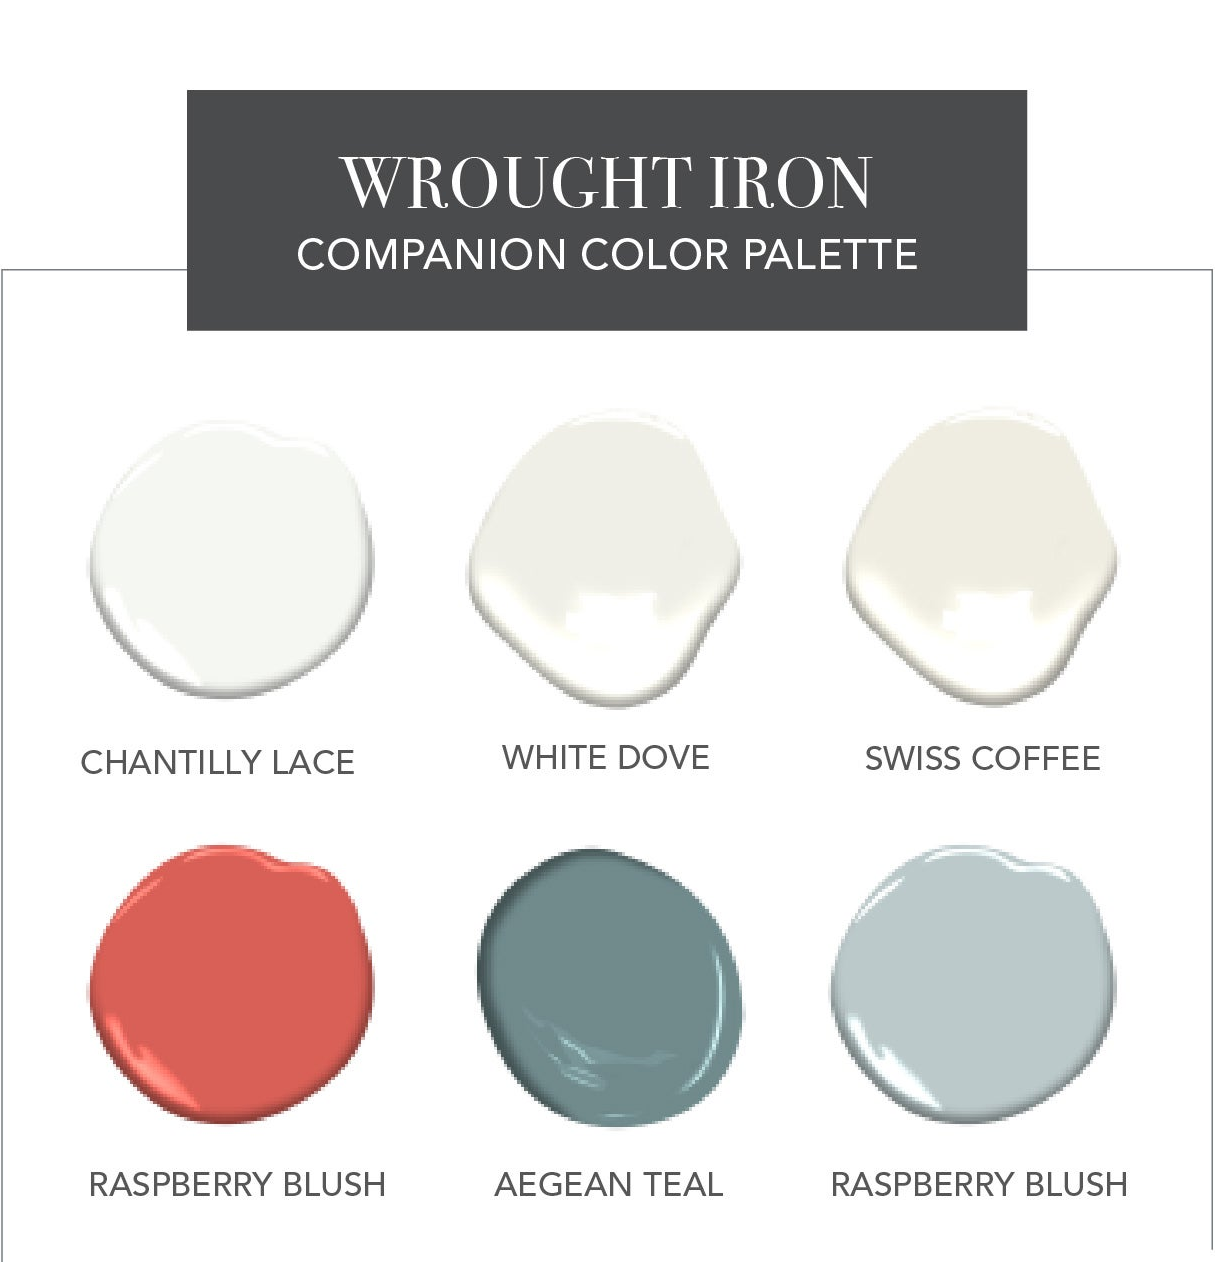 The Best-Coordinating Colors for Wrought Iron by Benjamin Moore